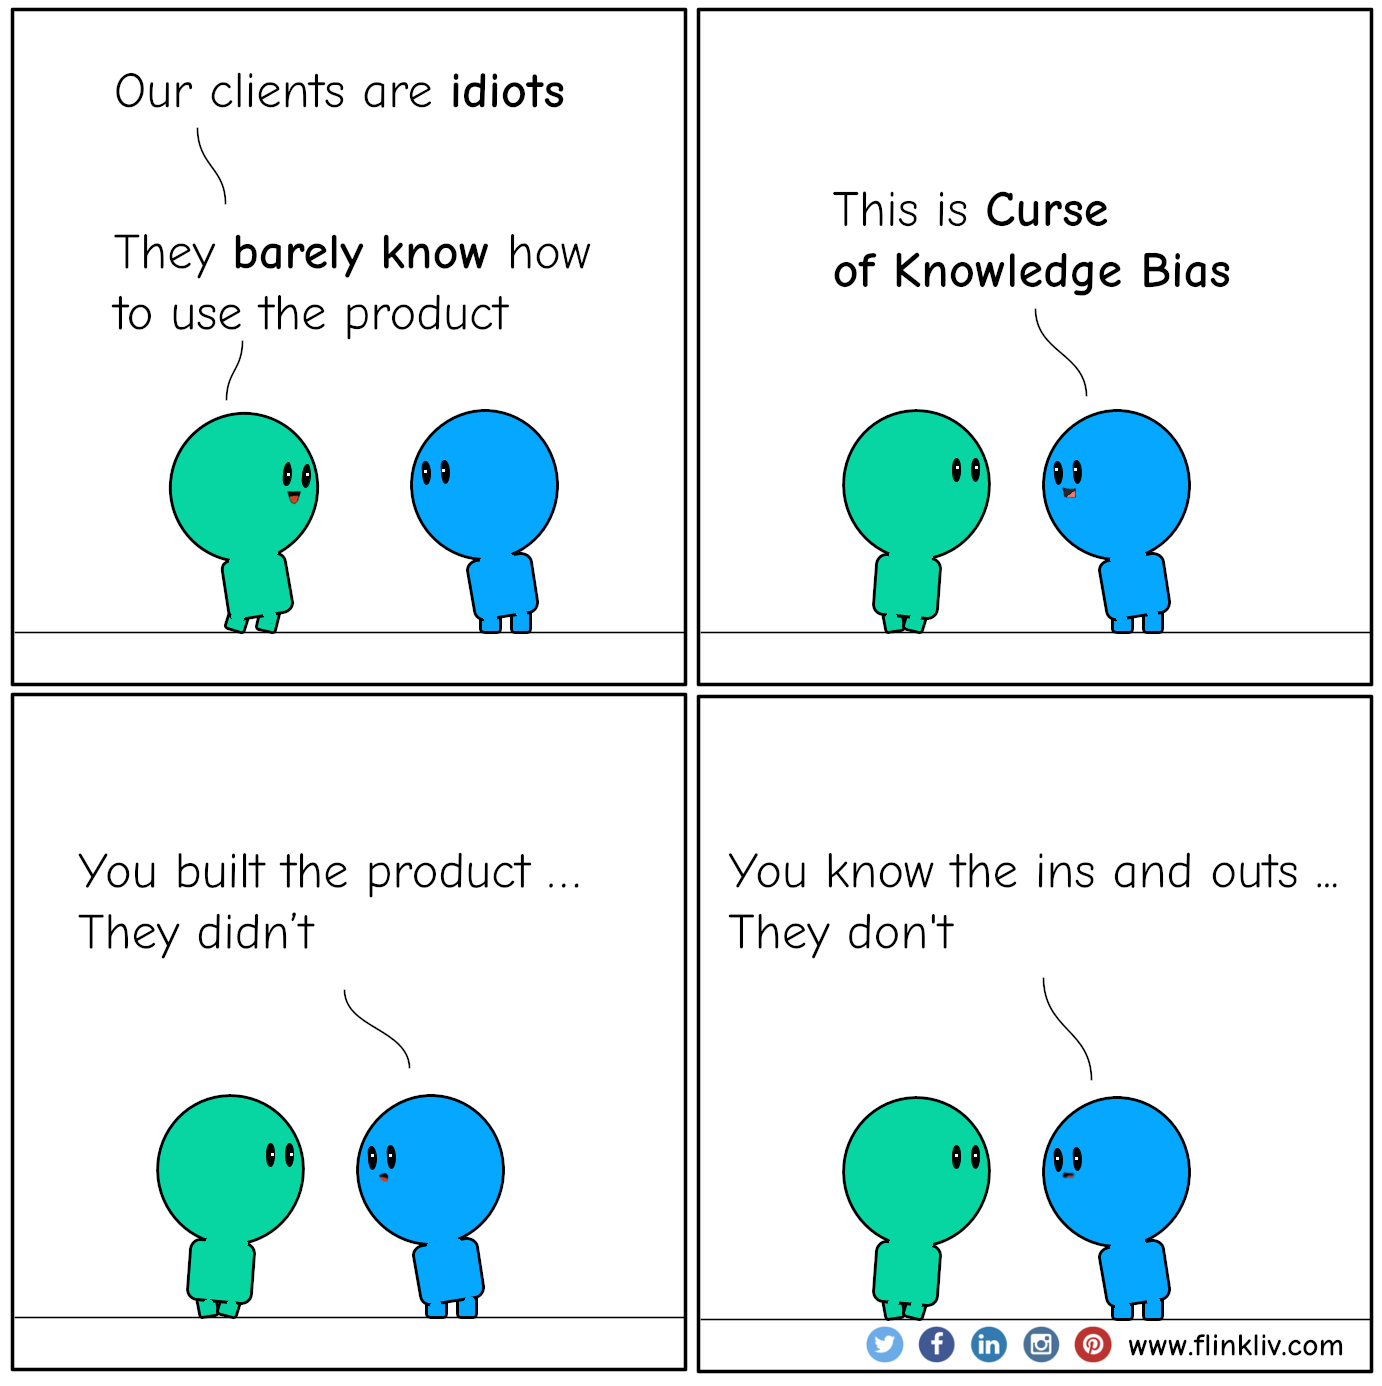 Conversation between A and B about the curse of knowledge bias.
              A: Our clients are idiots
B: Why?
A: They barely know how to use the product
B: This is a Cognitive Bias. 
A: What do you mean?
B: The Curse of Knowledge Bias
B: You built the product, you know the in and out, they don't
B: Clients need to be involved during the product development for test and UX

              